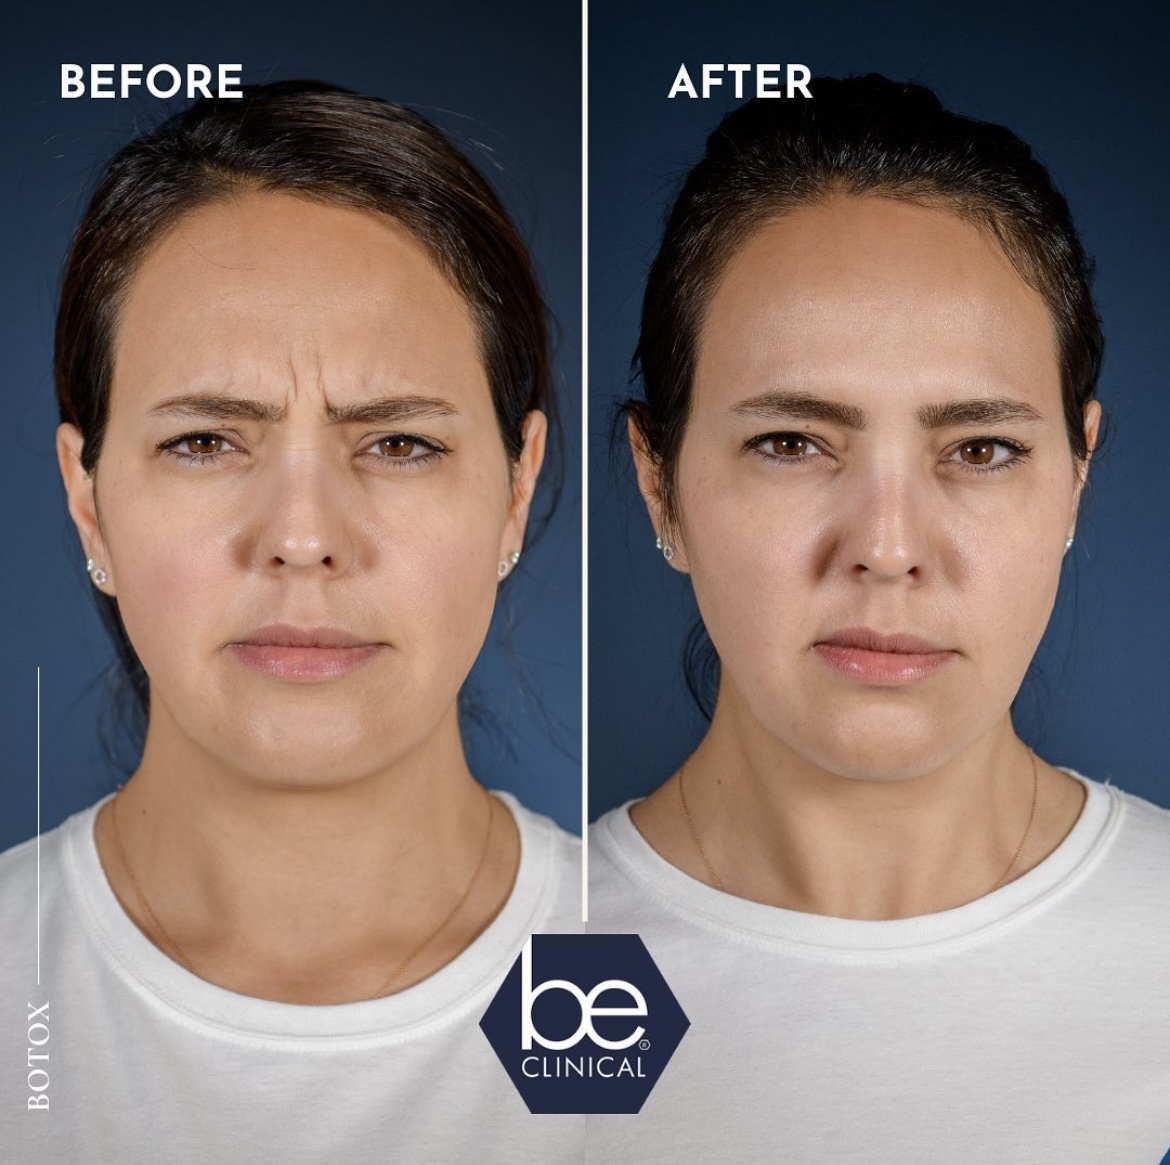 dysport-frown-lines-before-after-be-clinical